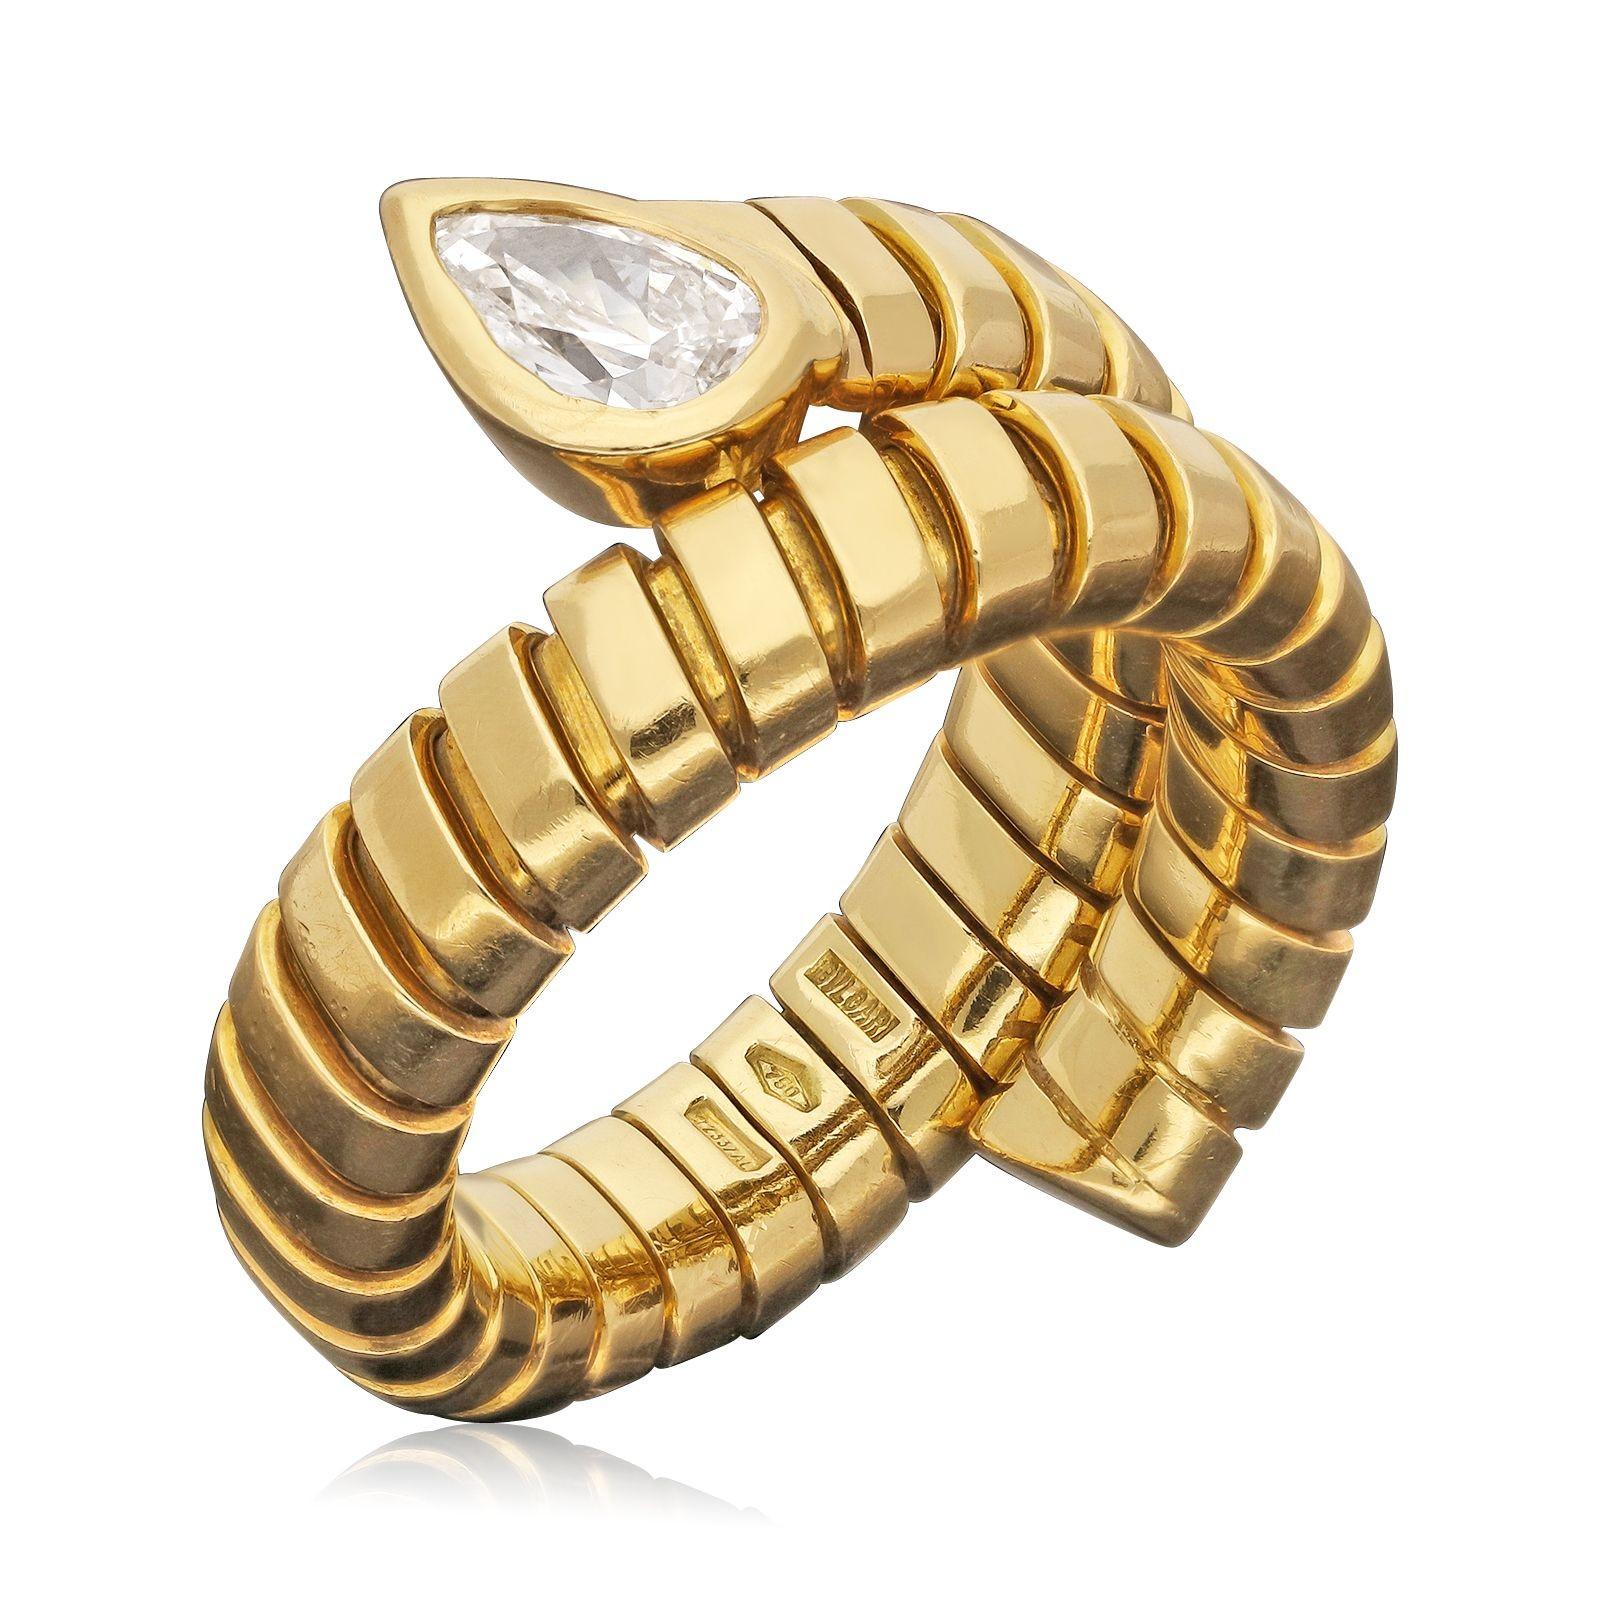 A Serpenti Tubogas gold and diamond flexible ring by Bulgari c.2000s, the body in 18ct gold with the characteristic expandable tubogas design that cleverly allows it to comfortably fit multiple finger sizes, wrapping one and a half times around the